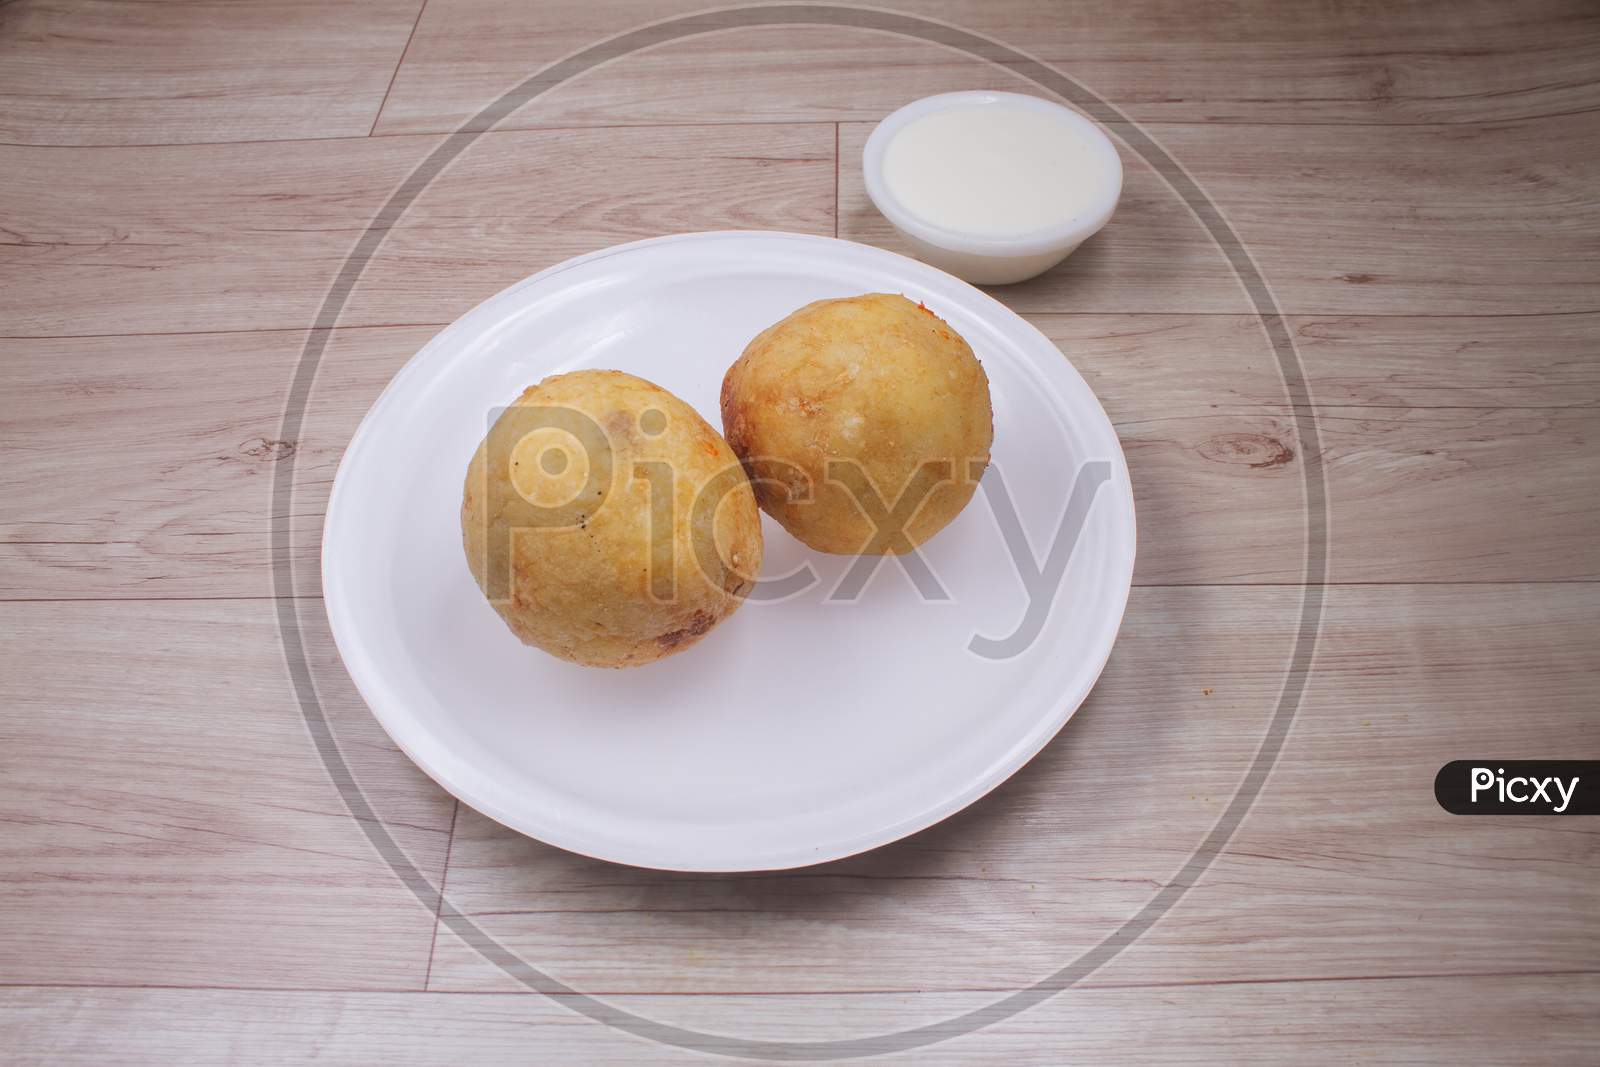 Dried Fruit Kachori Is A Small, Round Ball Filled With Masala And Cashew